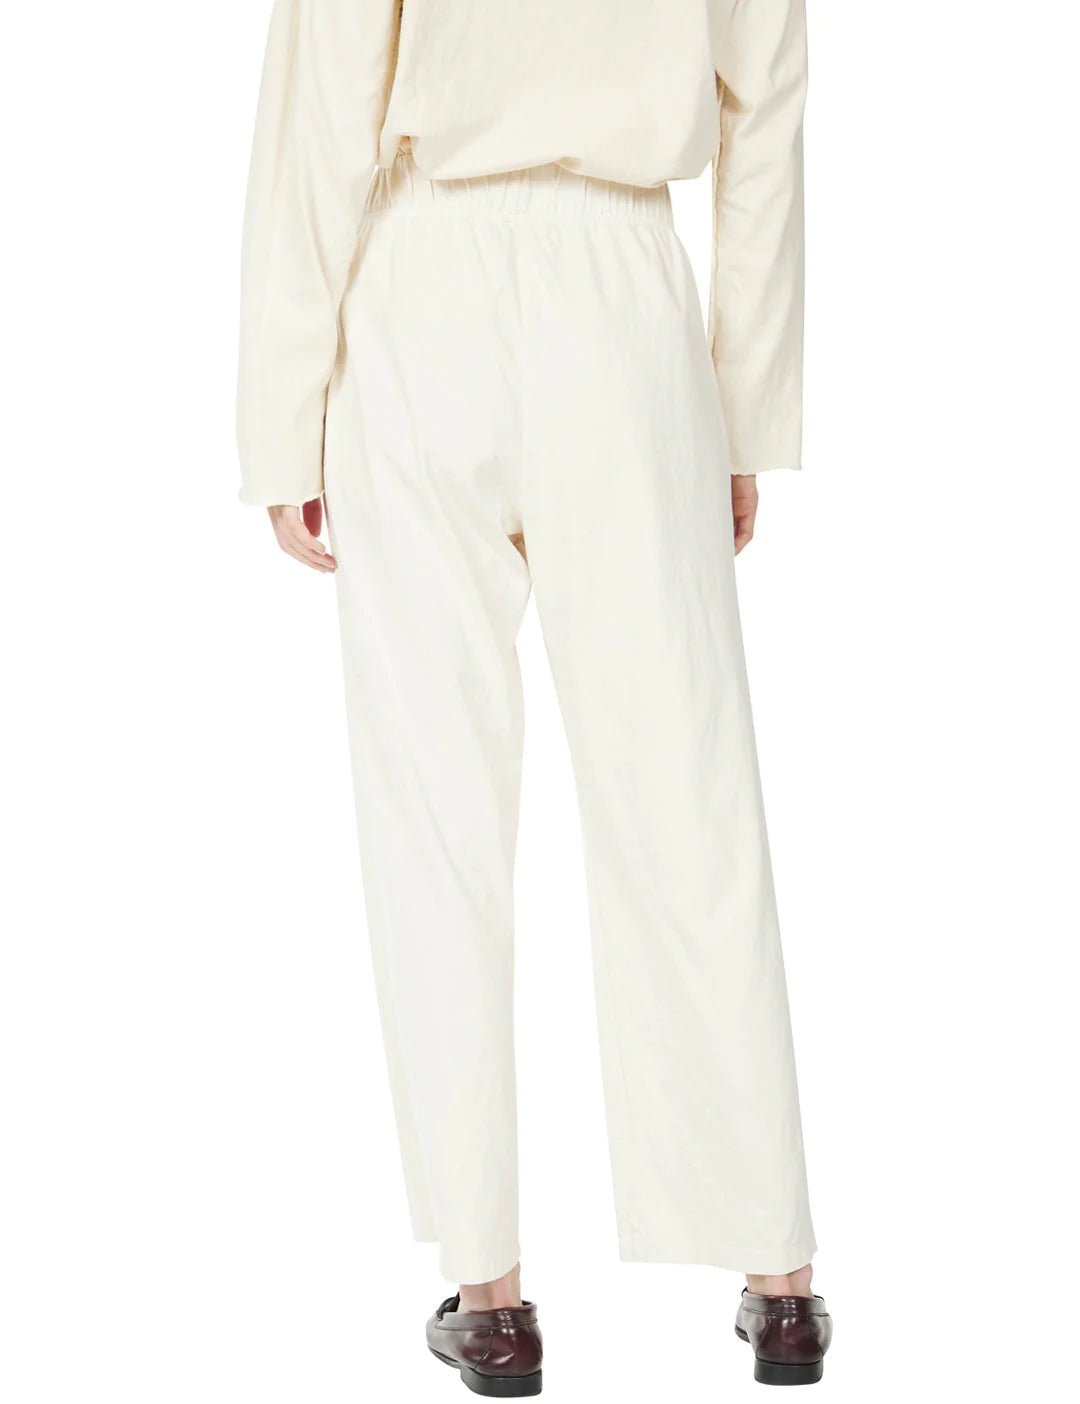 Penny Pleat Front Pant in Ivory